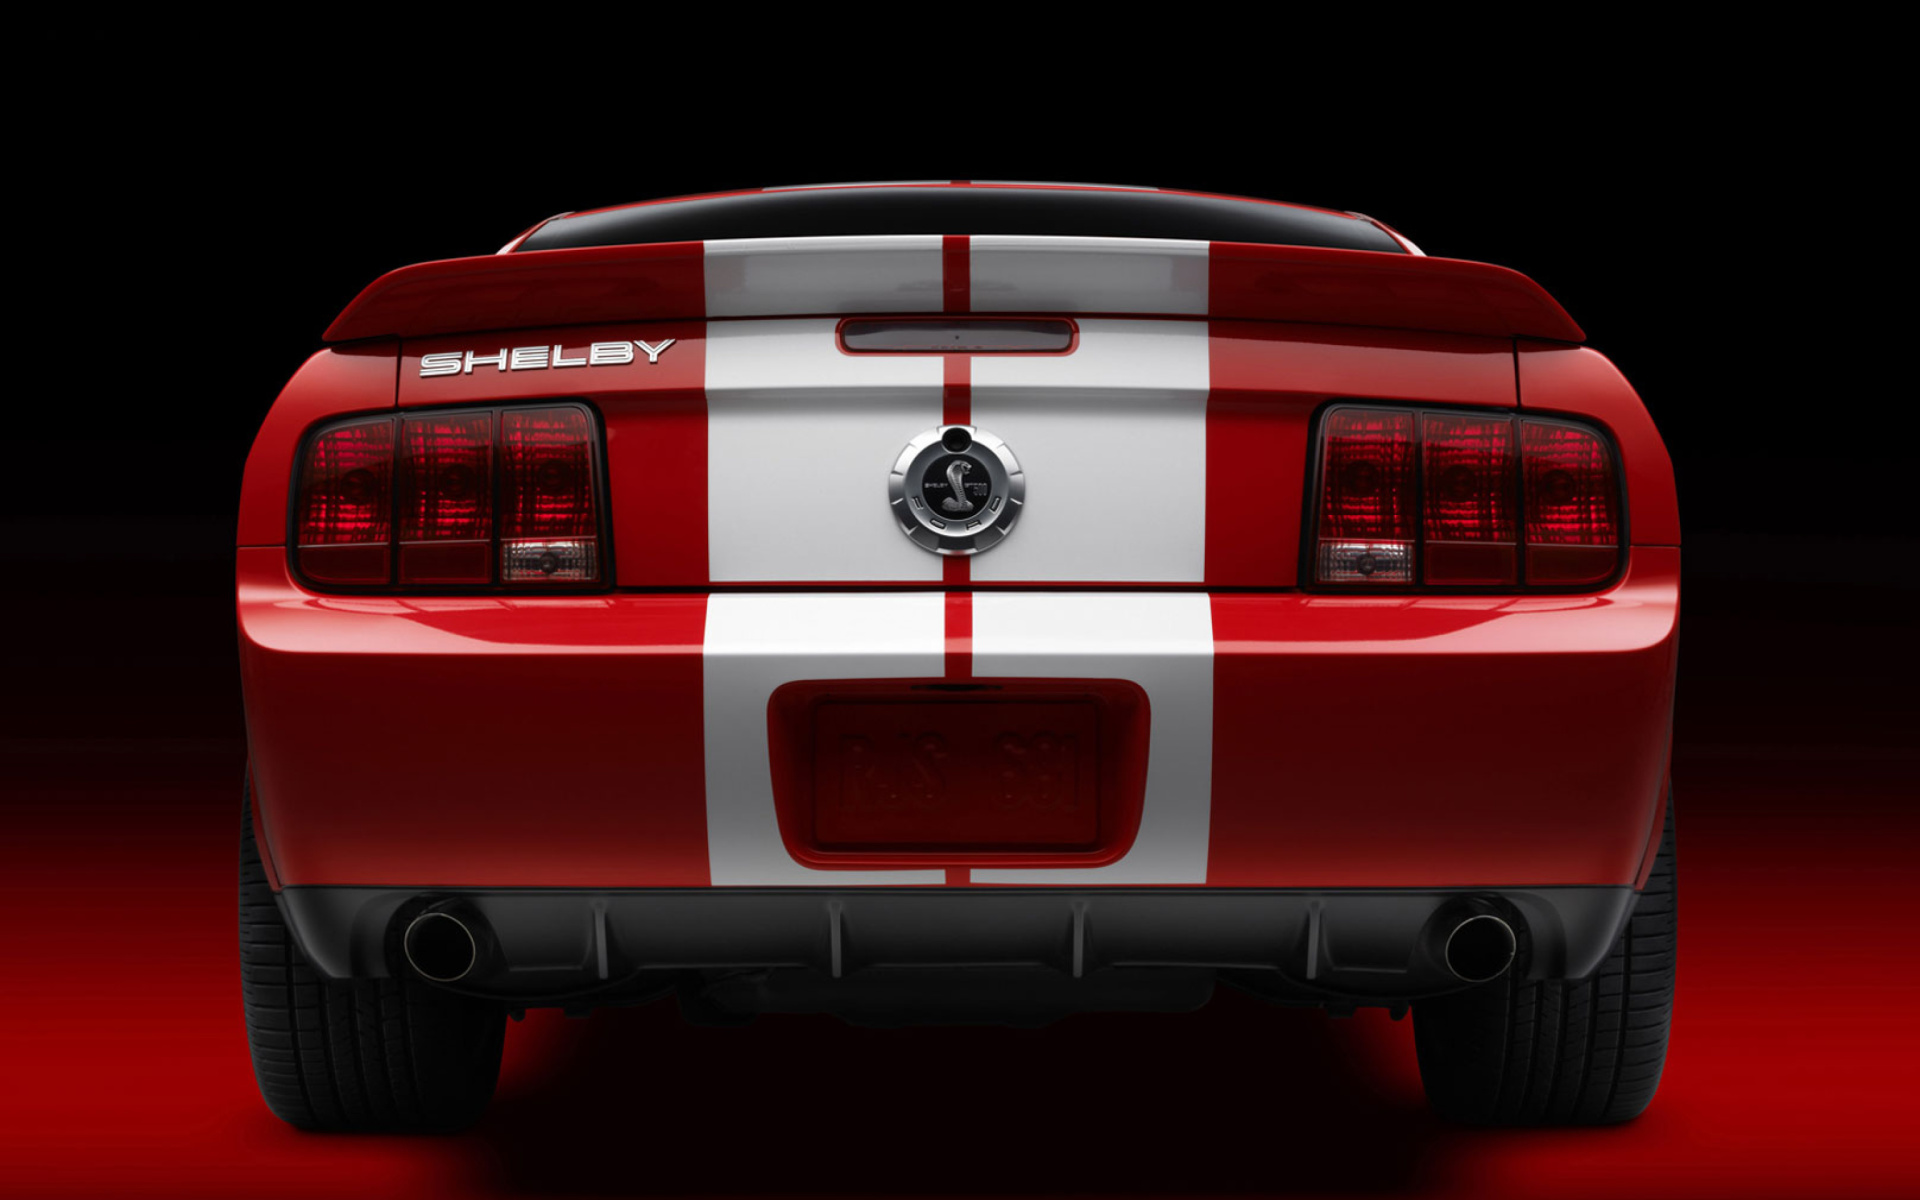 Ford Mustang Shelby GT500 wallpaper 1920x1200